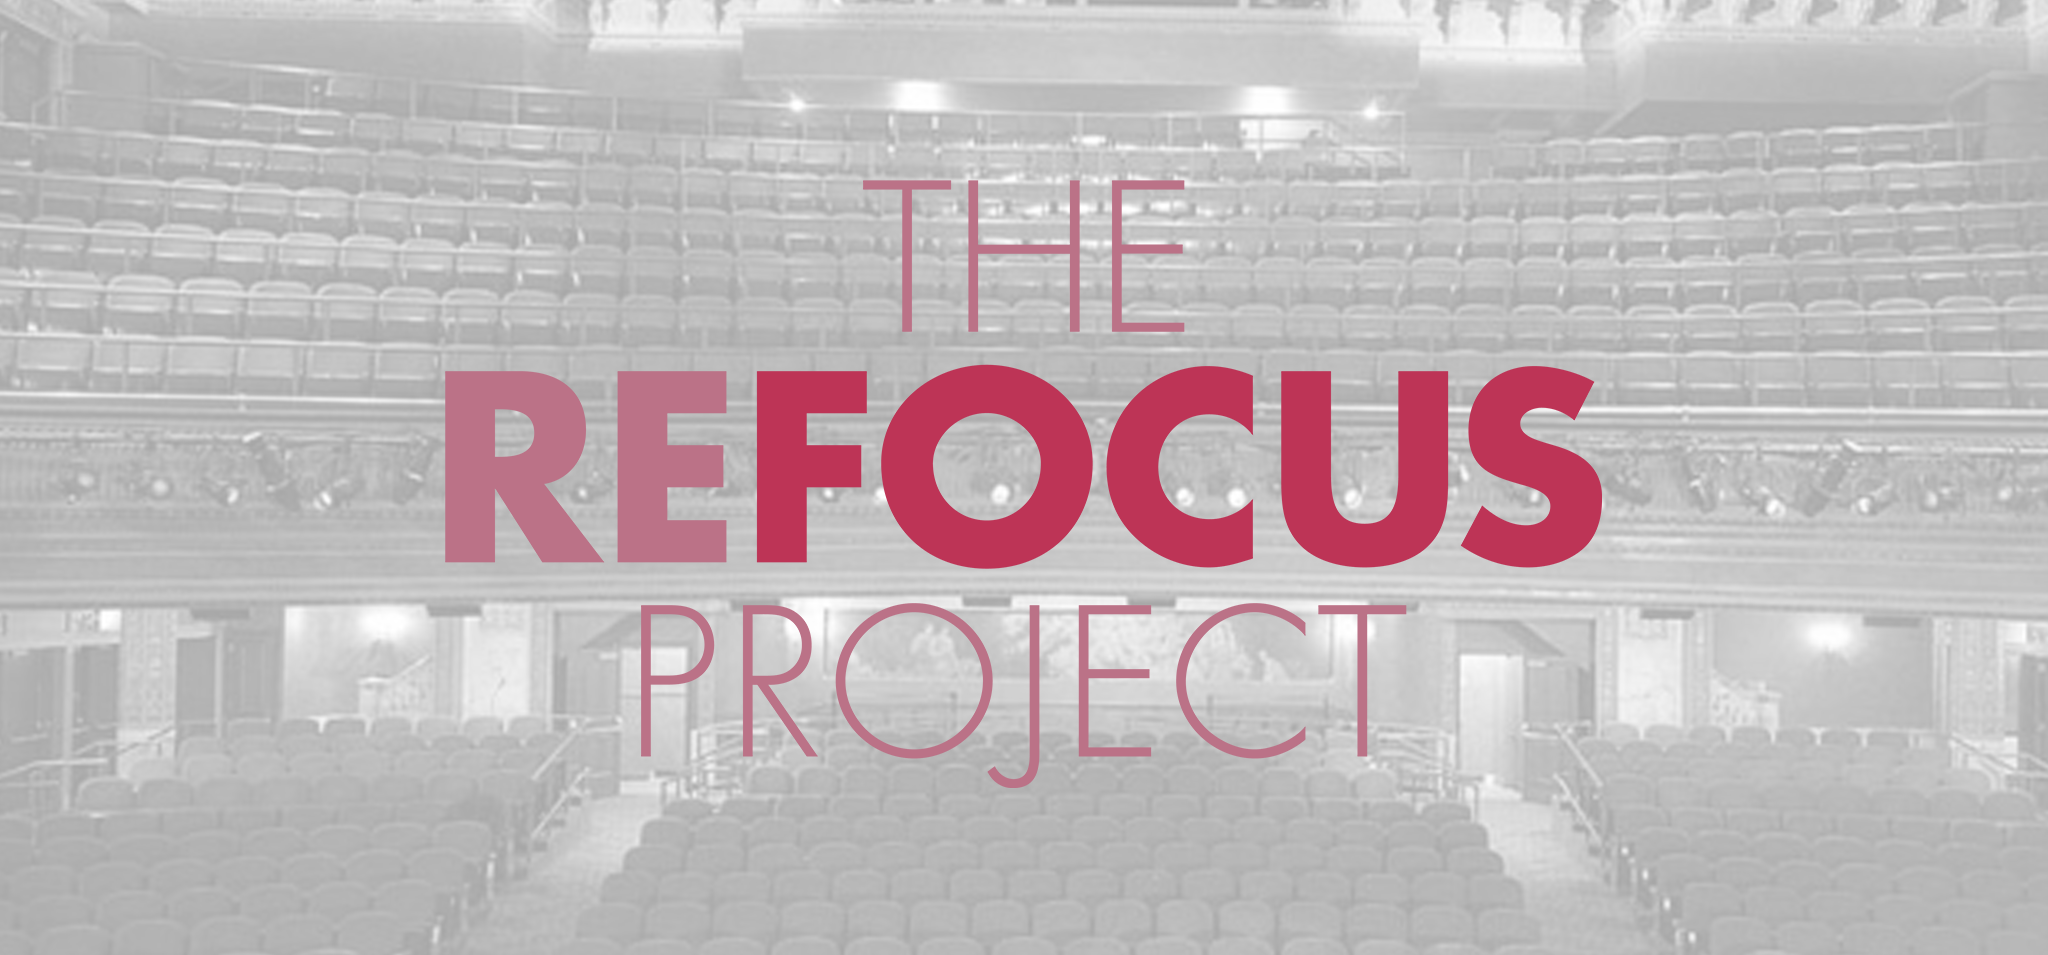 The Refocus Project